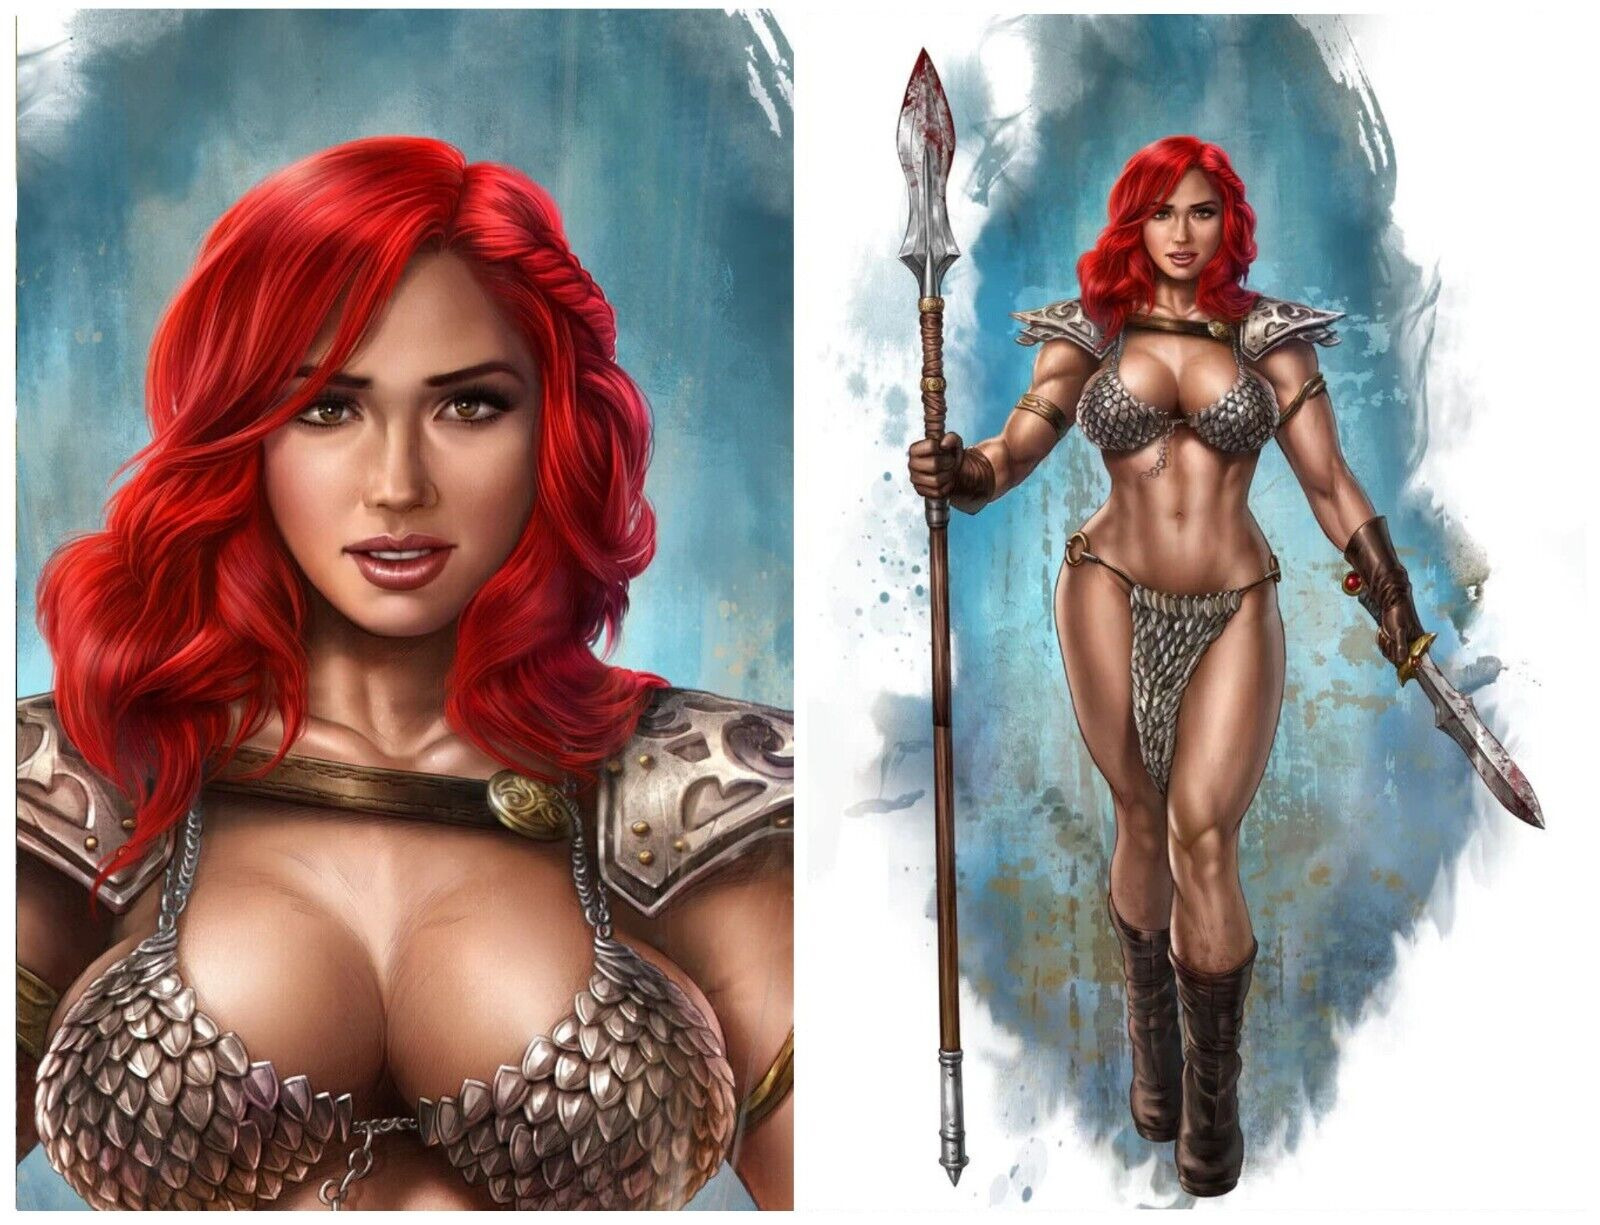 Immortal Red Sonja #4 Dominic Glover C2E2 Exclusive Variant Cover Set Dynamite